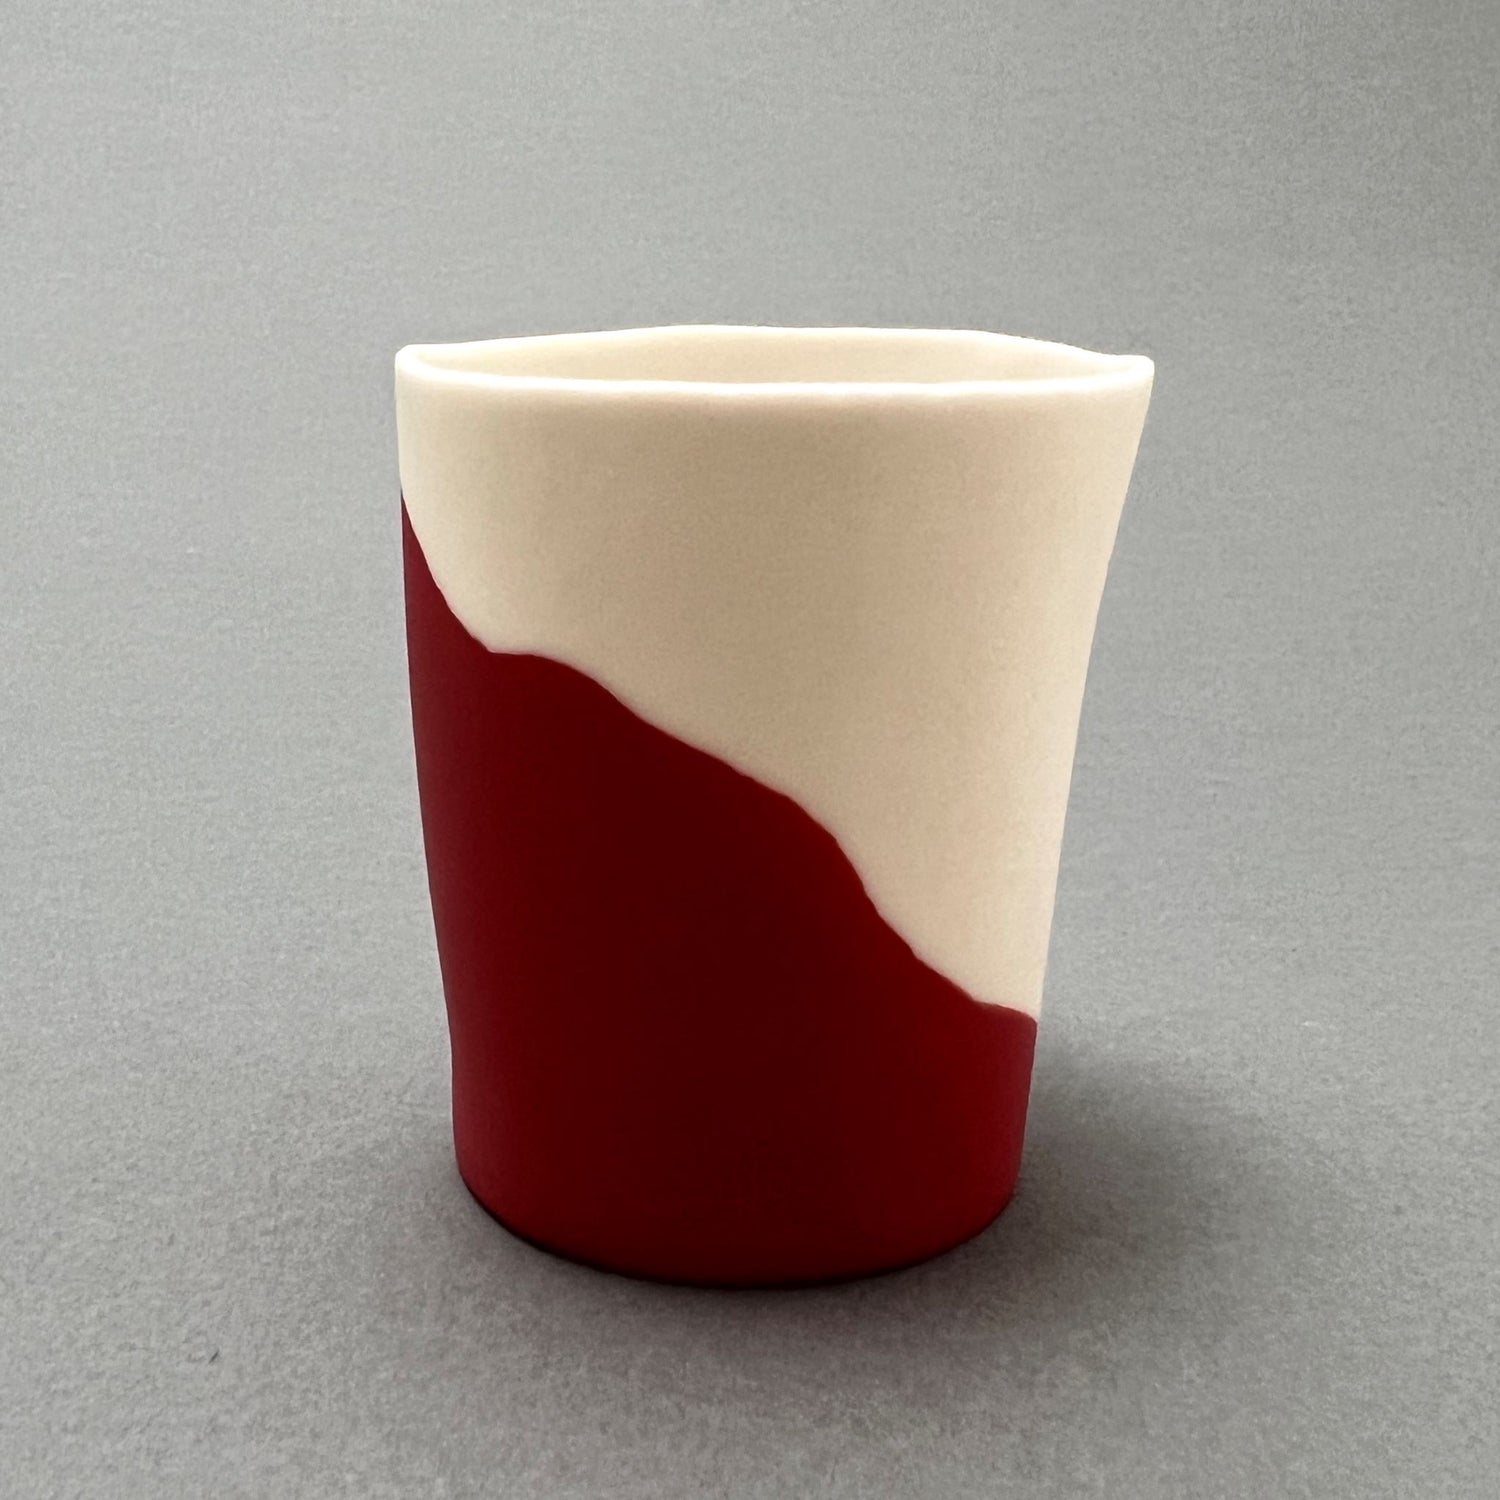 A small red and white colored porcelain cup standing on a gray background